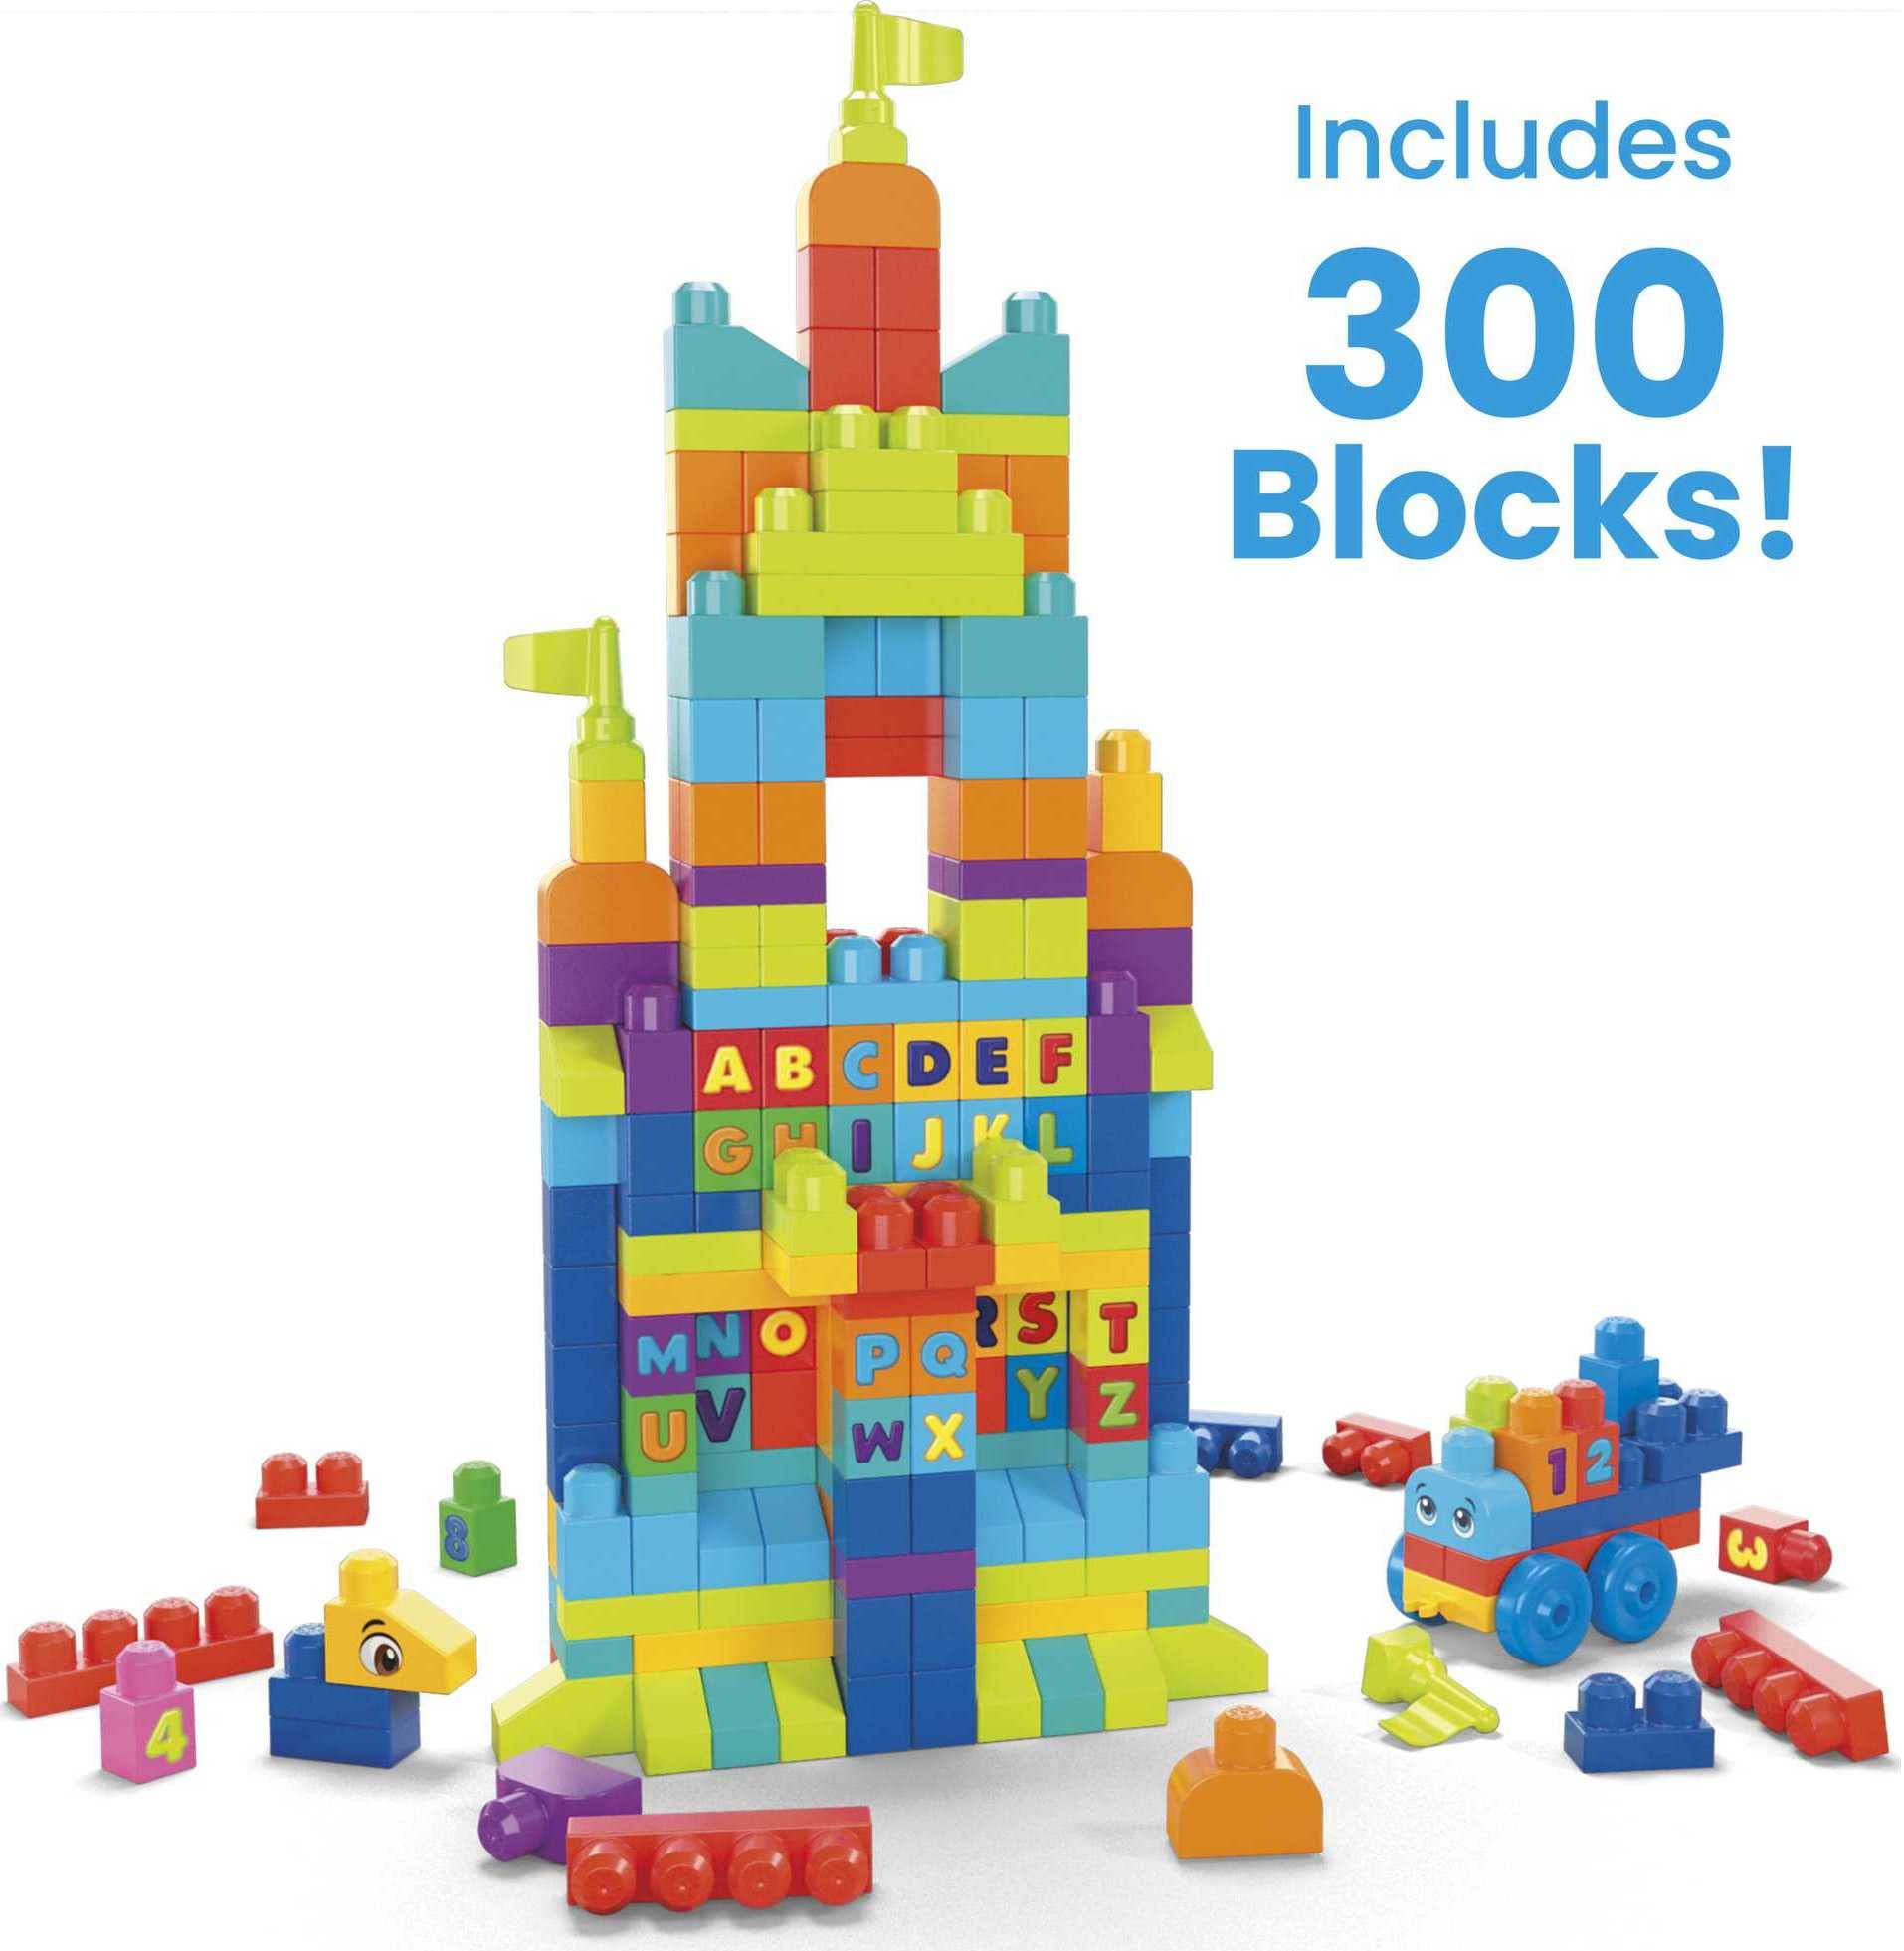 MEGA BLOKS Fisher-Price Toddler Block Toys, Even Bigger Building Bag with 300 Pieces and Storage, Gift Ideas for Kids Age 1+ Years